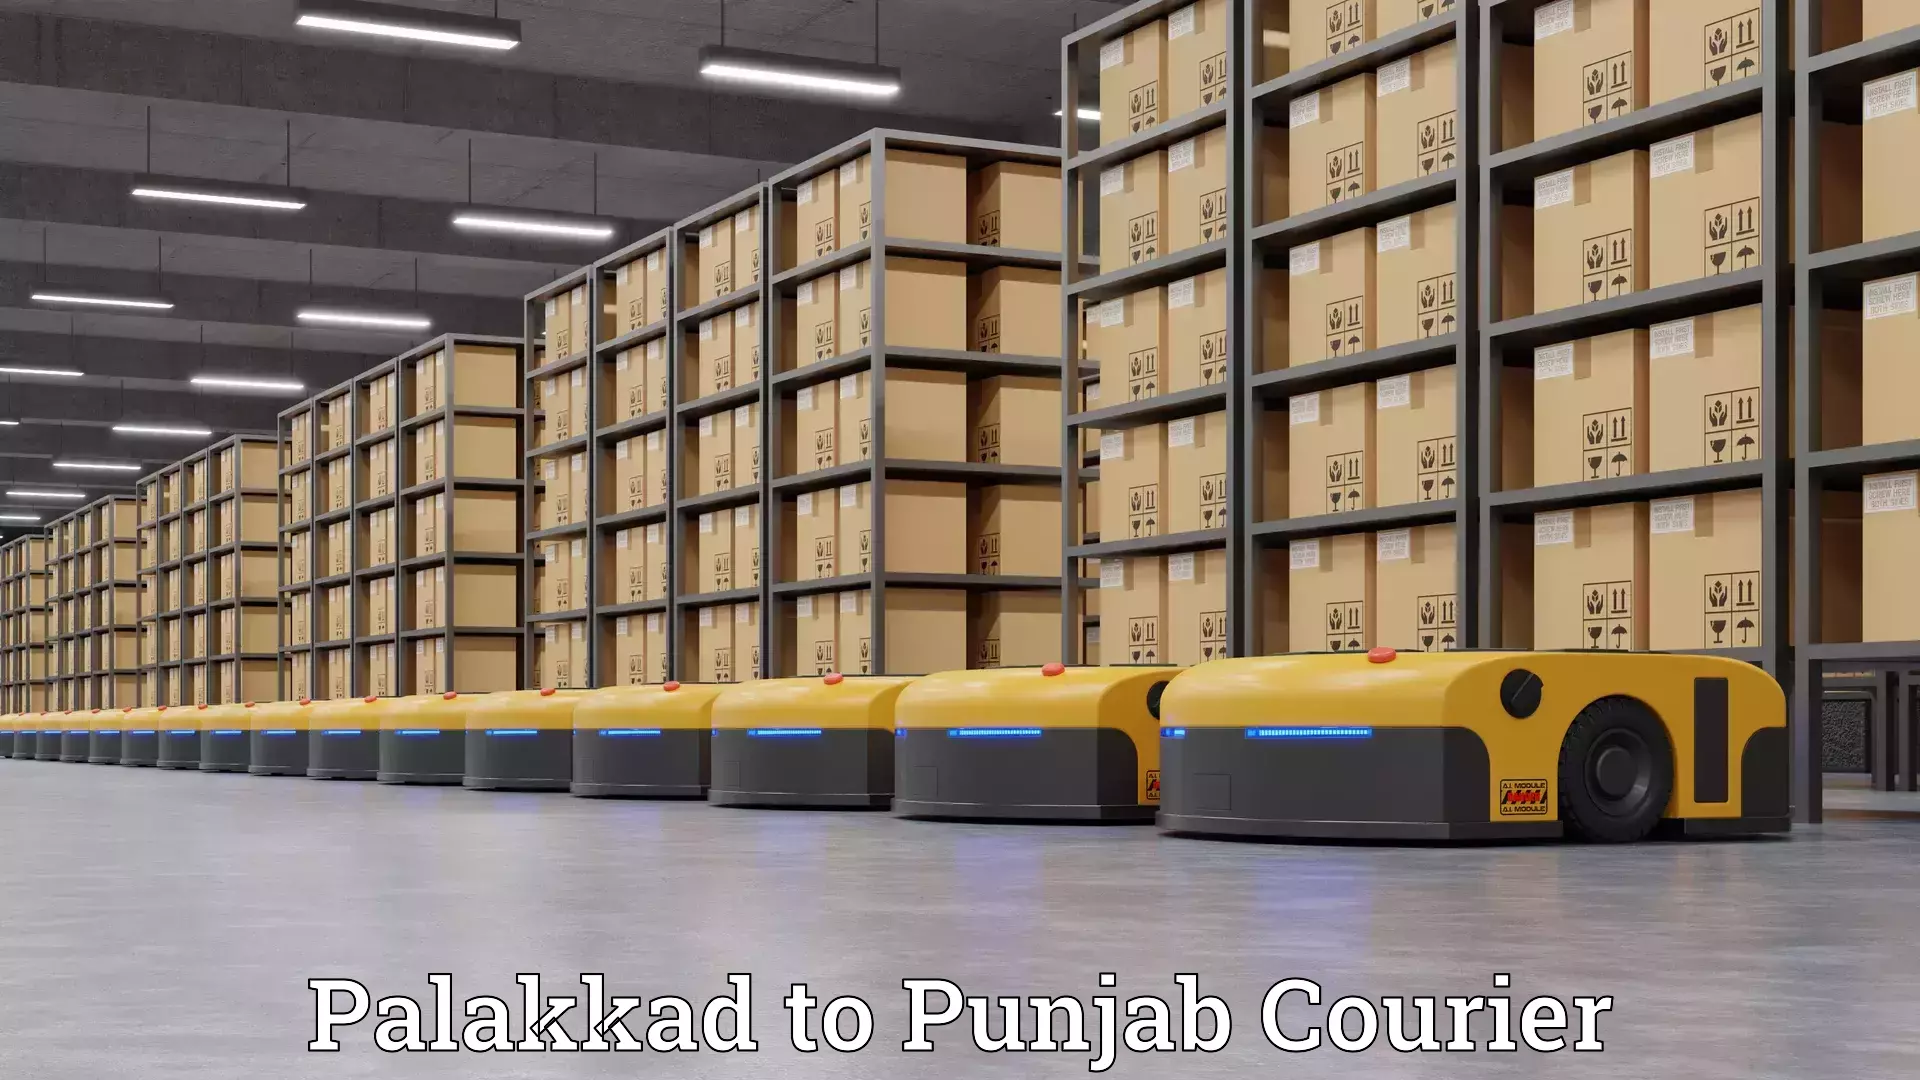 Moving and storage services Palakkad to Punjab